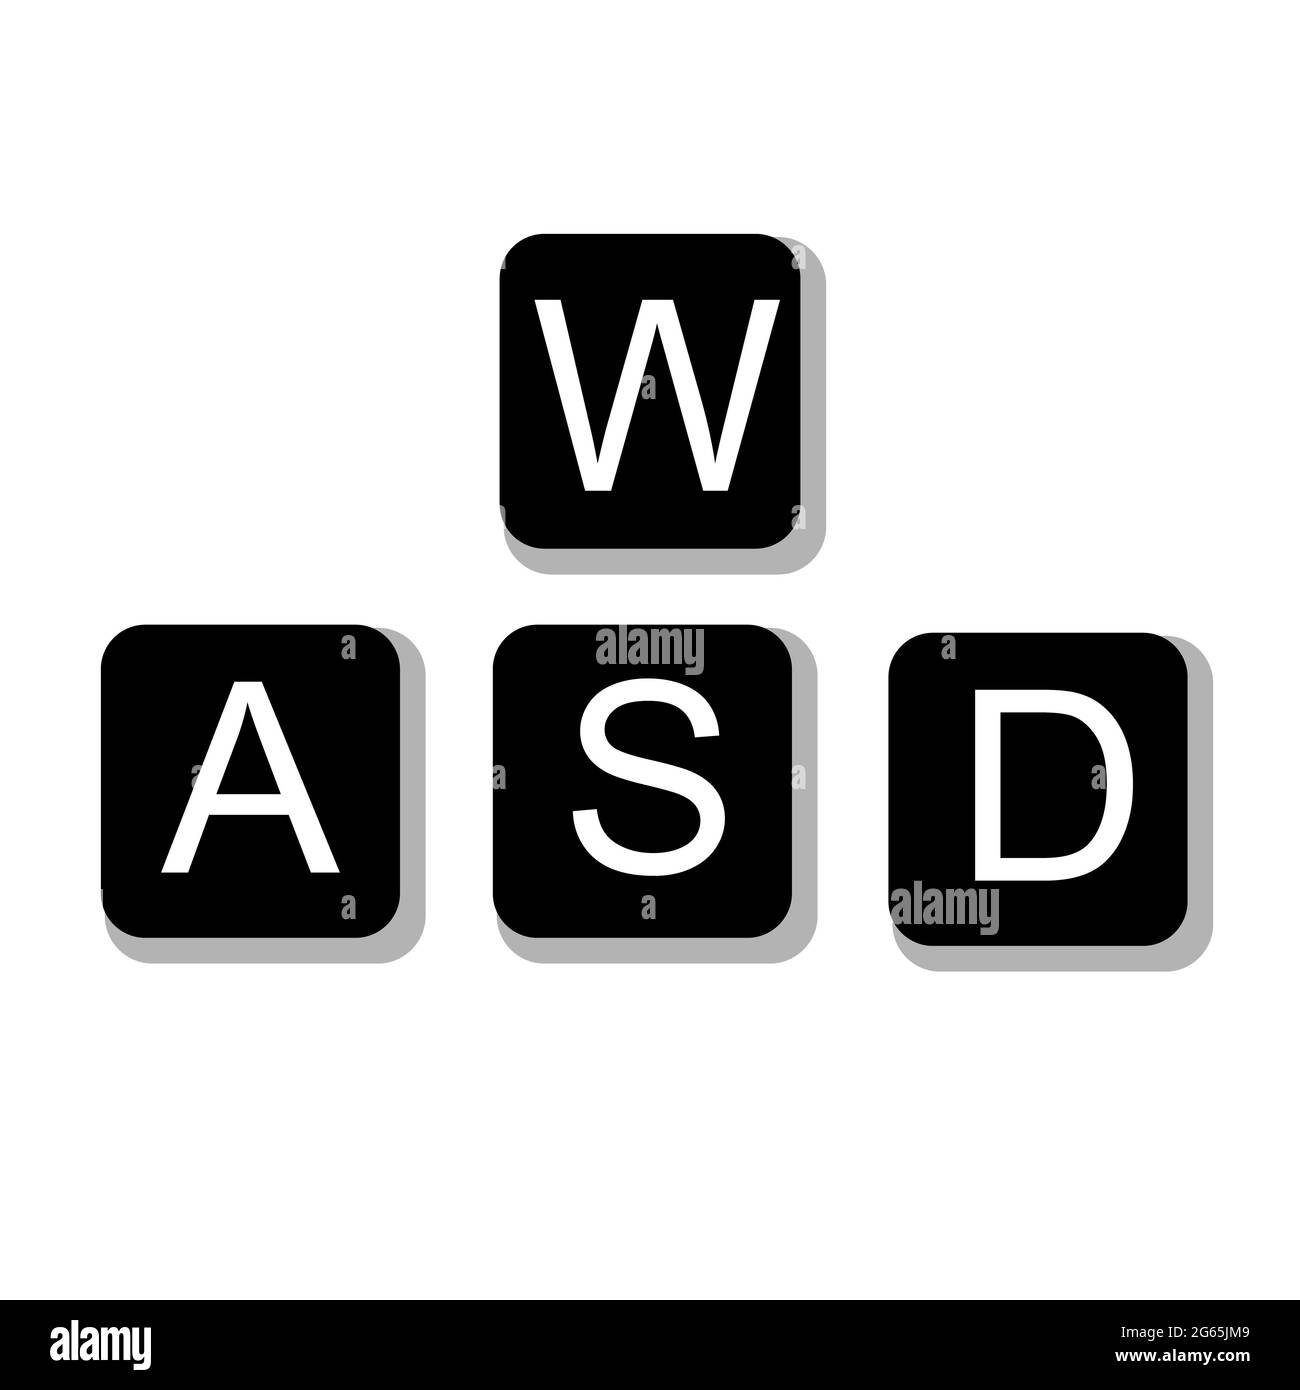 W A S D keys icon on white background. game control keyboard buttons. Alphabetic block sign. flat style. Stock Photo